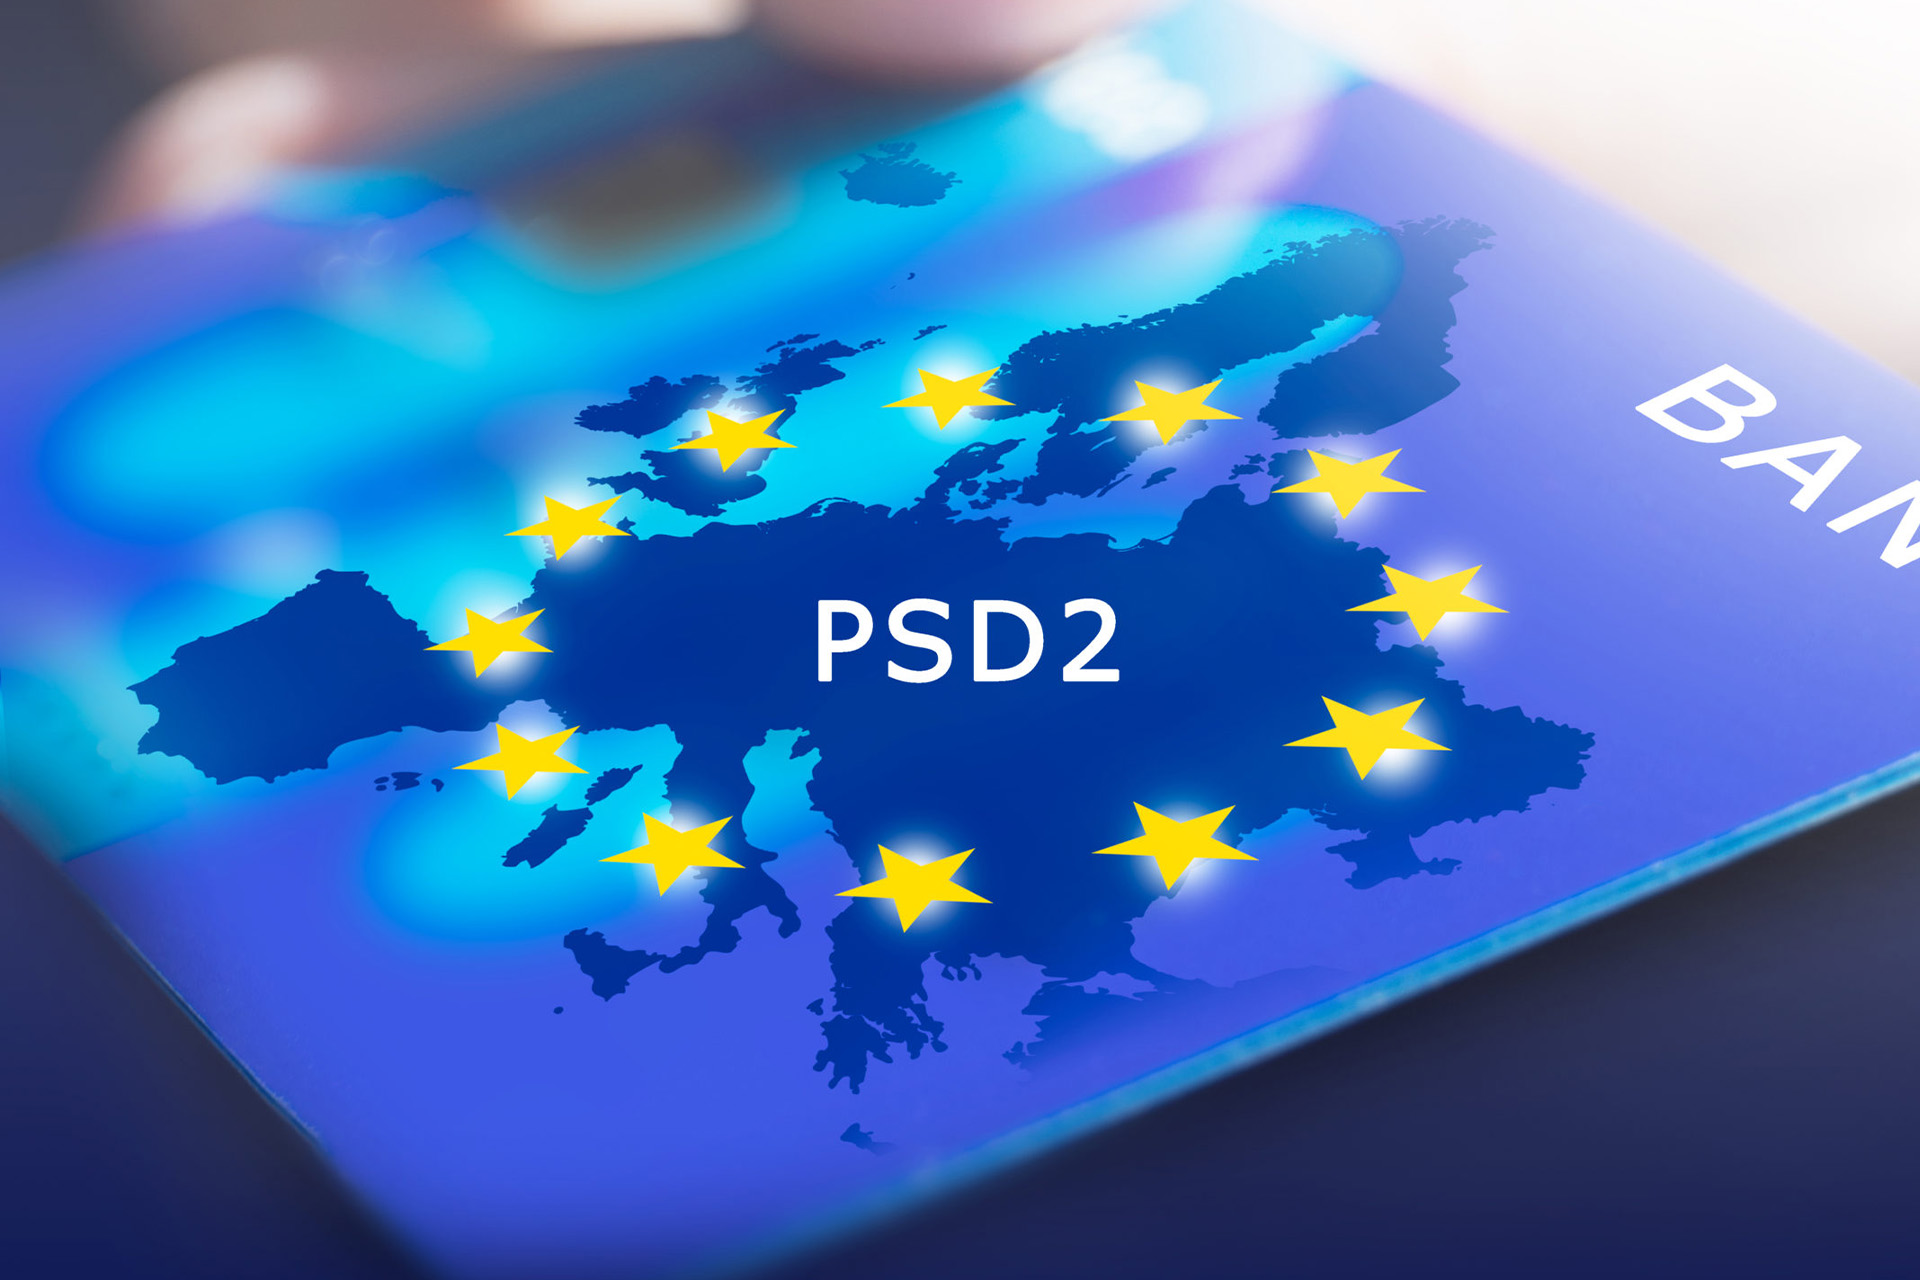 How has PSD2 changed the way insurance companies operate?